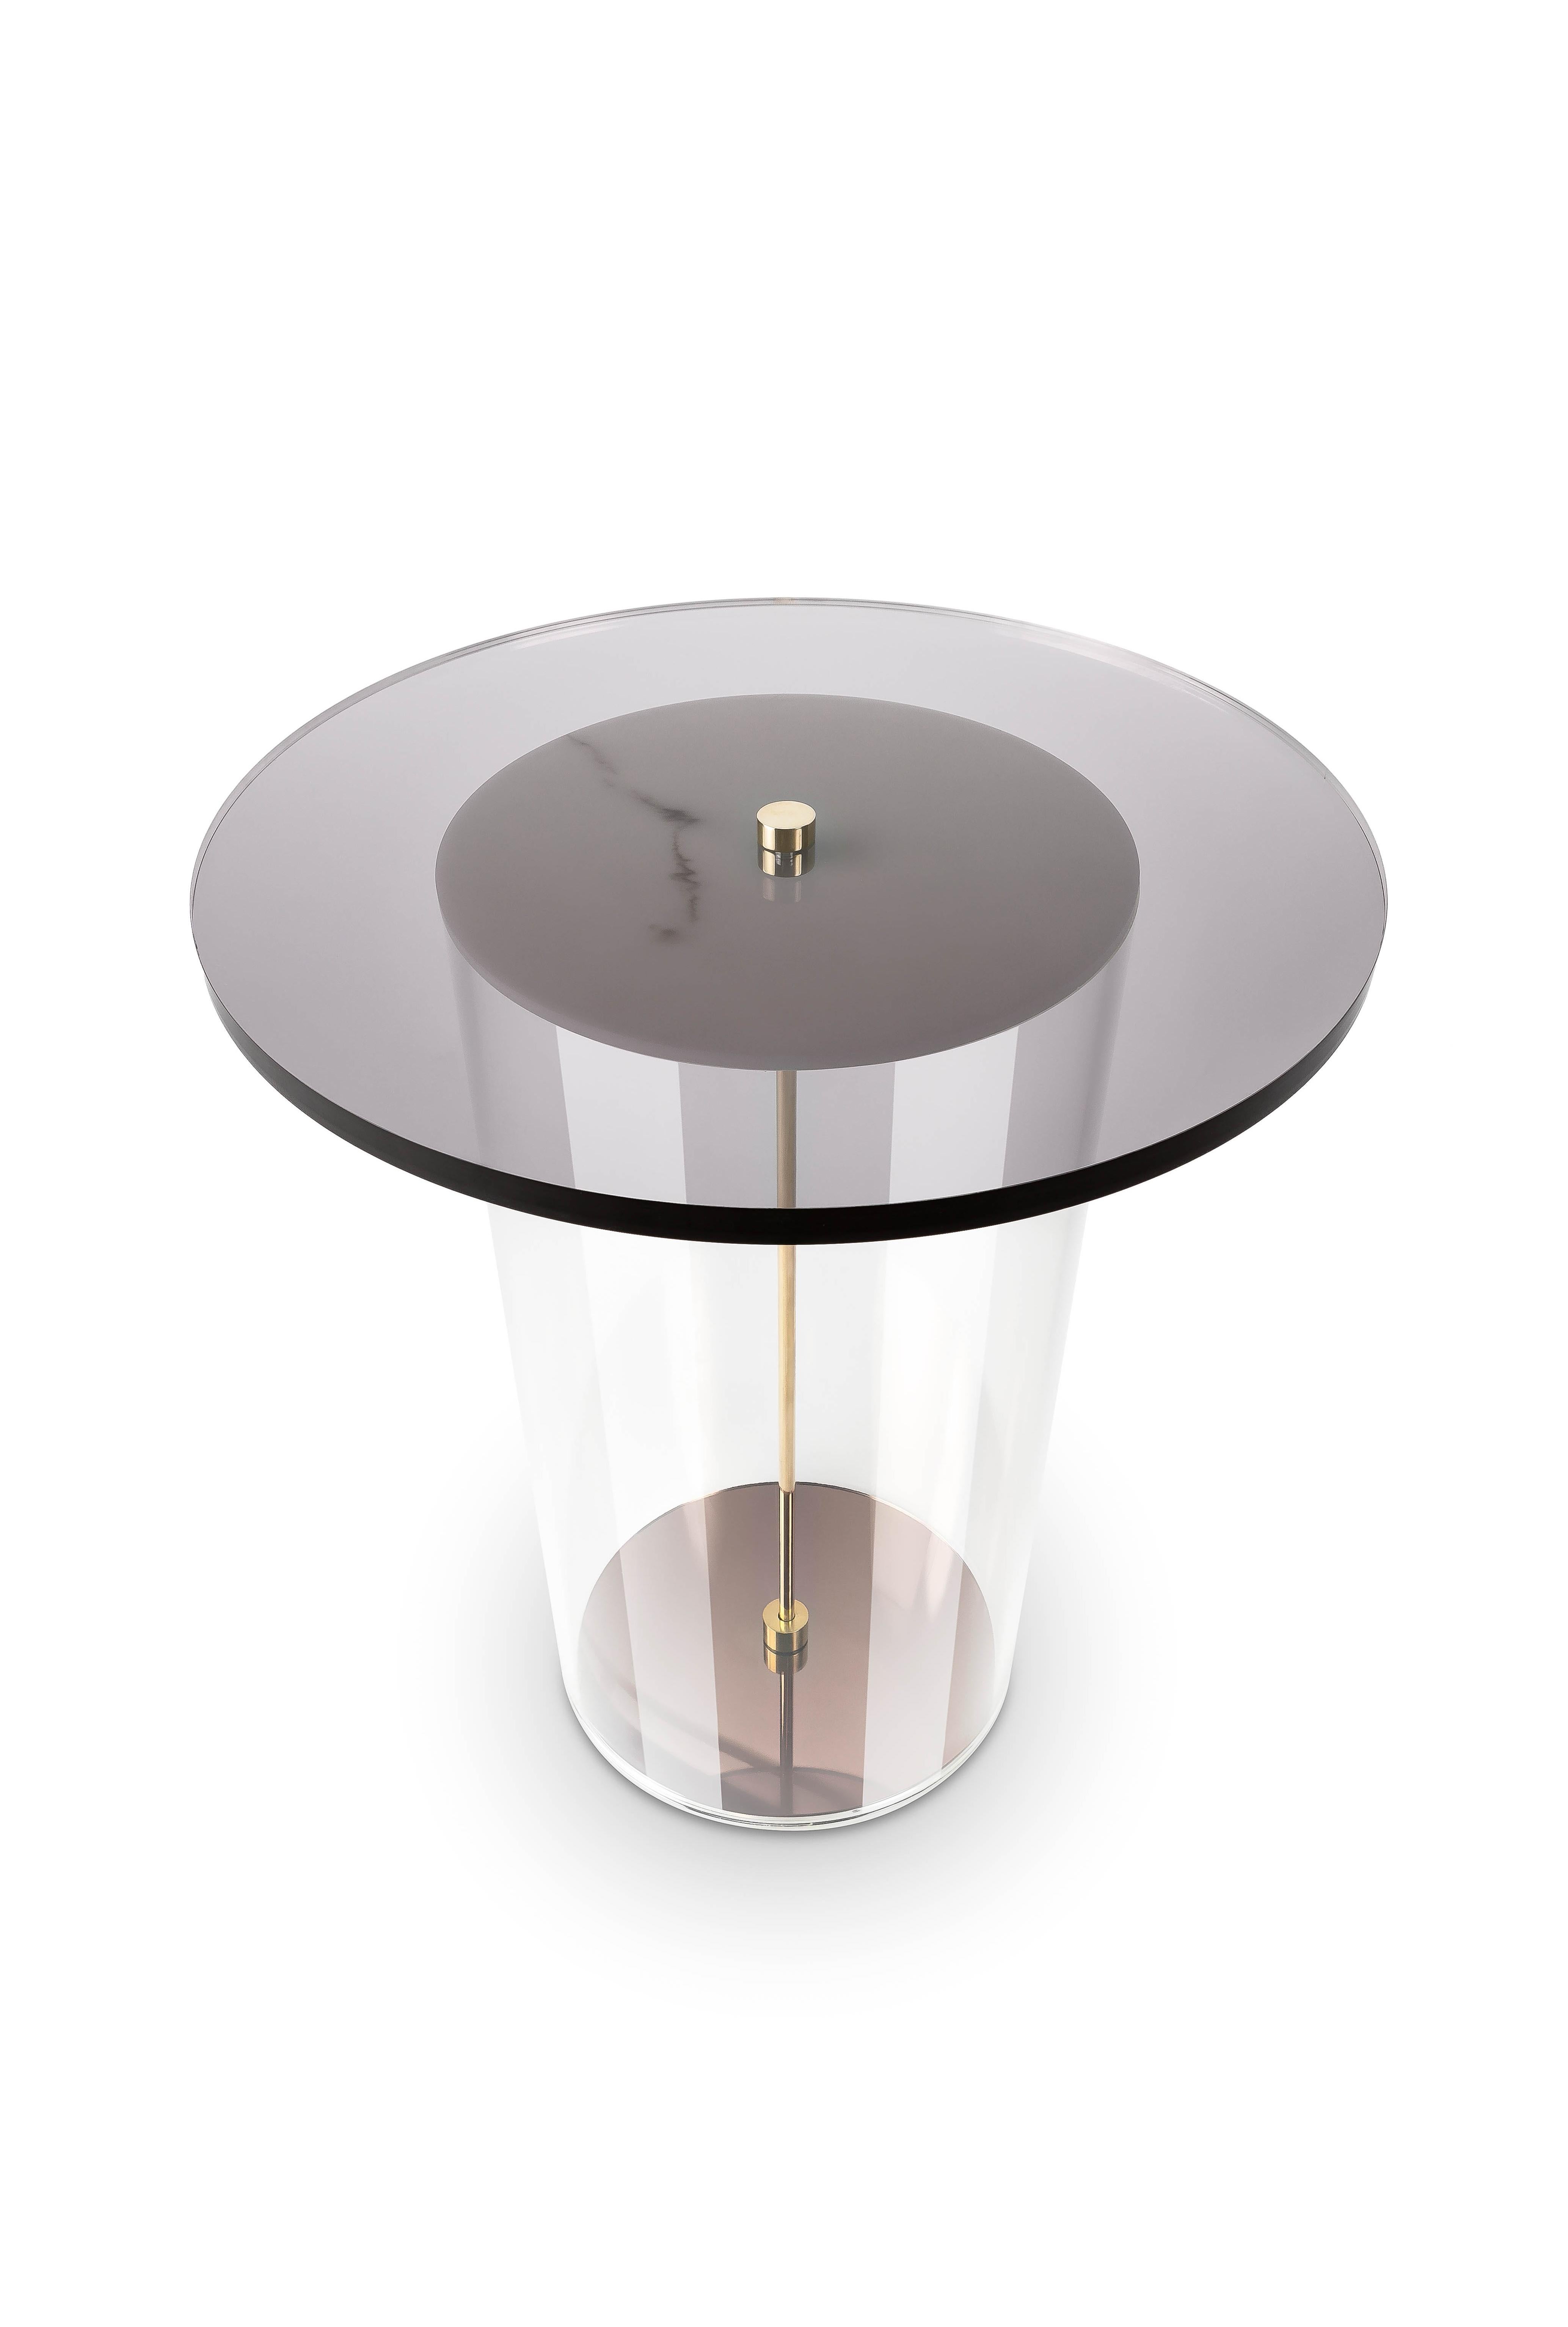 Lucent side table by Fabian Zeijler
Dimensions: 50 x 50 x 52.7 cm
Materials: Brass, faux translucent stone and plexiglas

Other color options are available.

Note: The veins in the Faux translucent stone might be slightly different from the